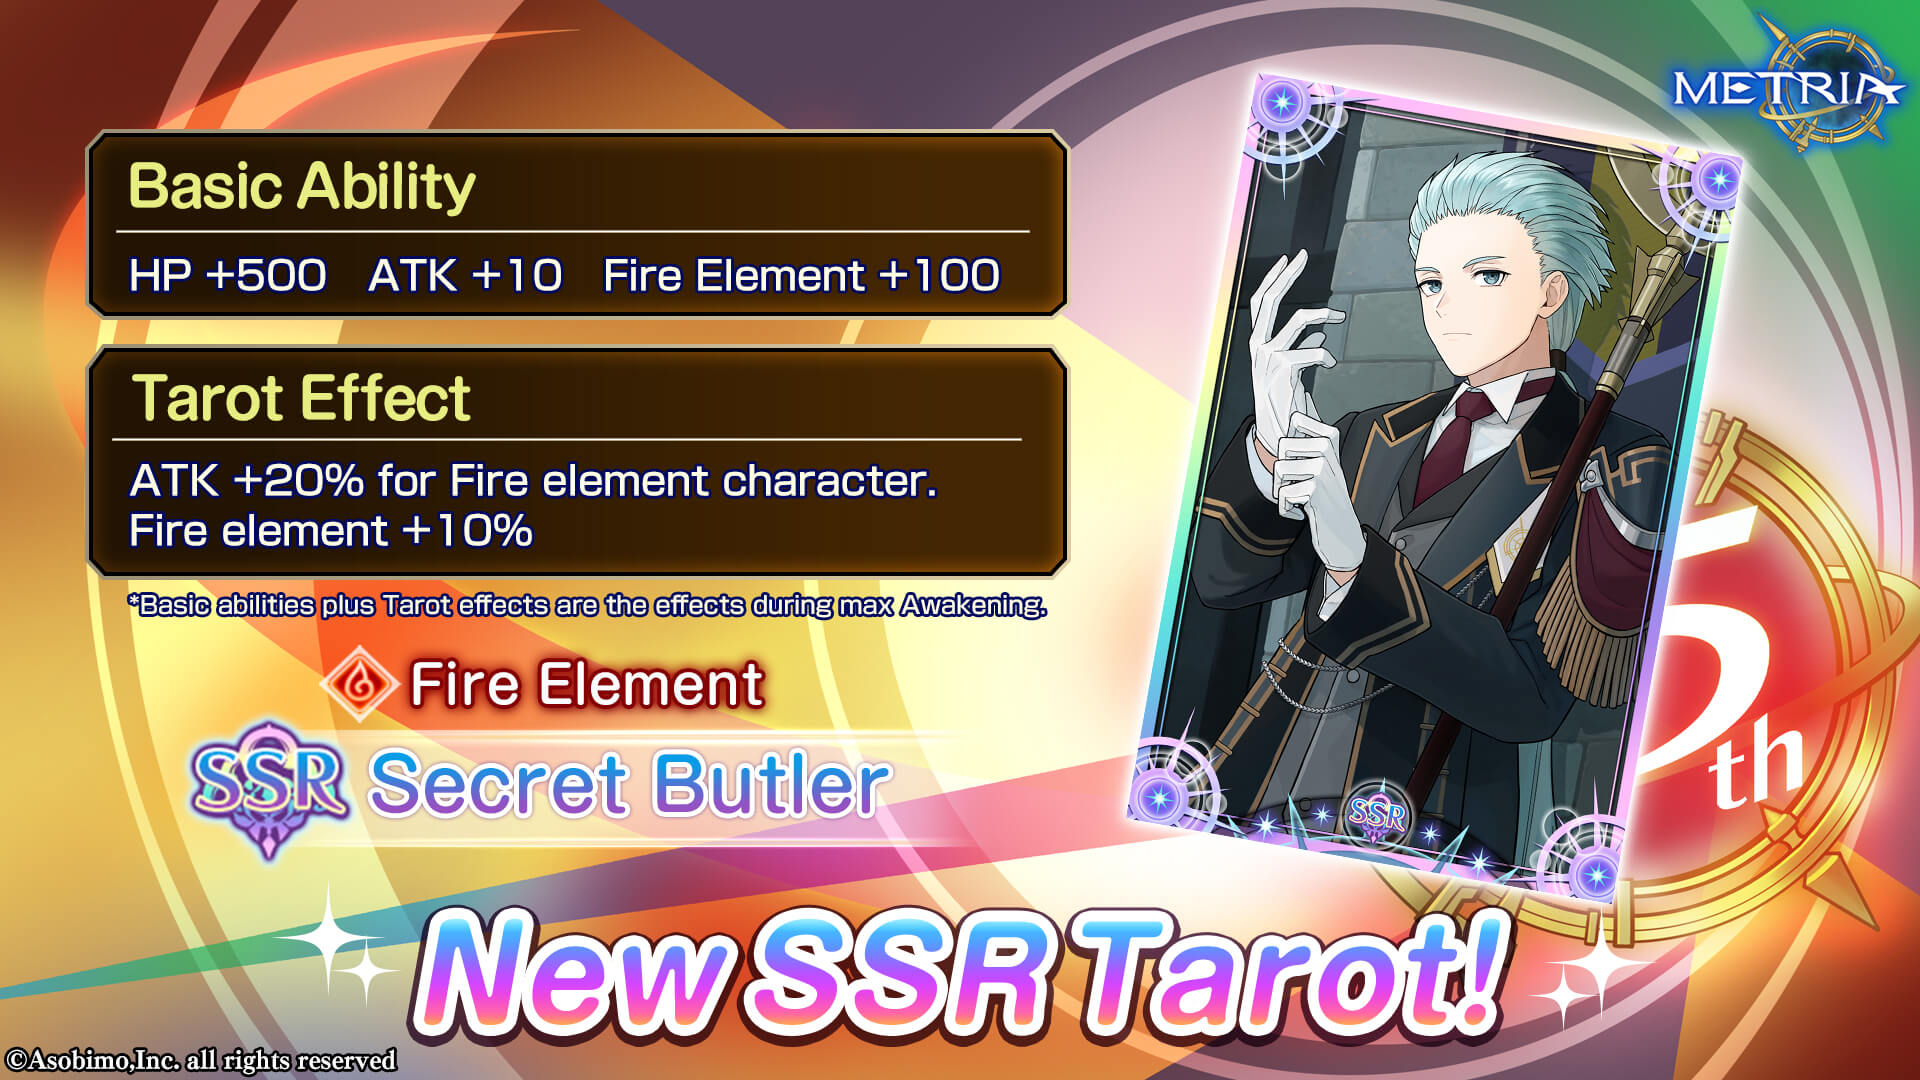 Fire Element New SSR Tarot: "Secret Butler" Available for Purchase!